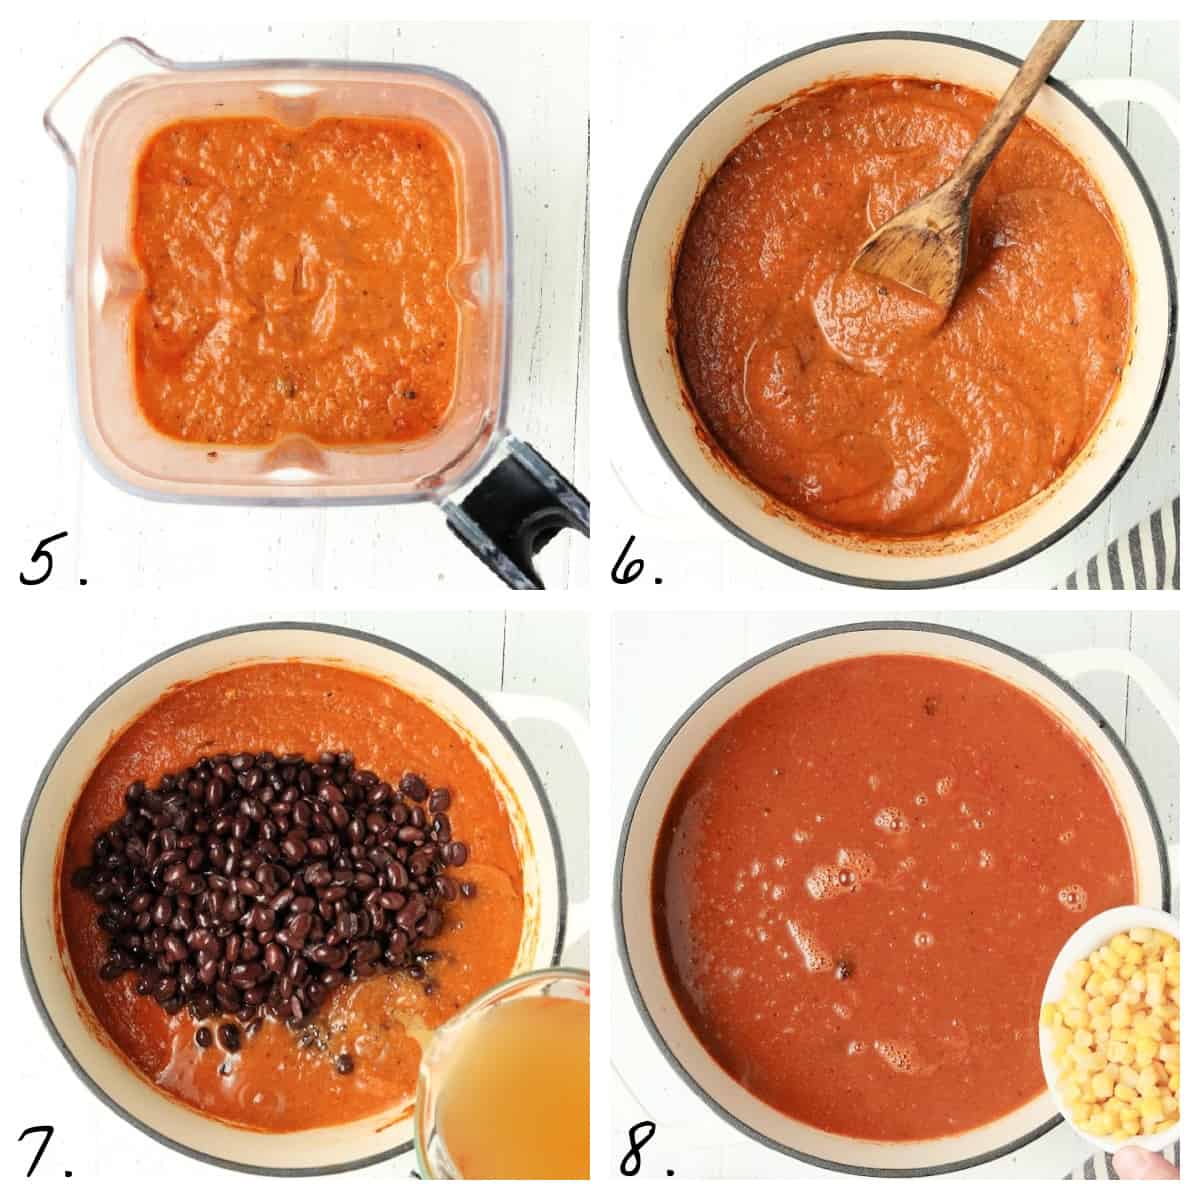 4 process photos of blending sauce, adding beans, and simmering in a pot. 